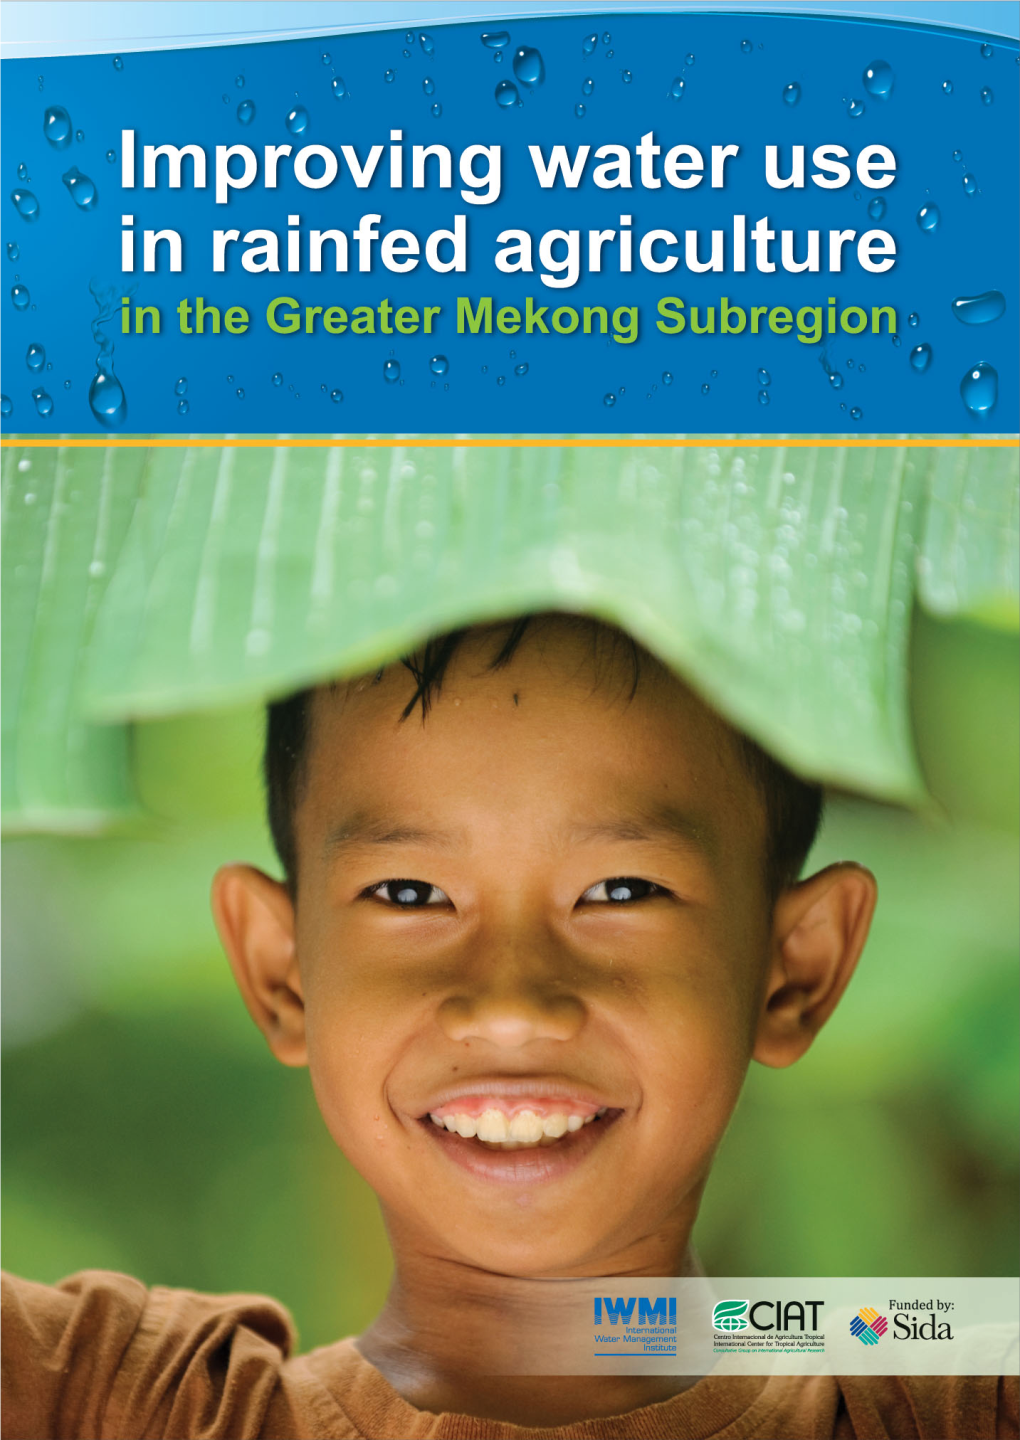 Improving Water Use in Rainfed Agriculture in the Greater Mekong Subregion